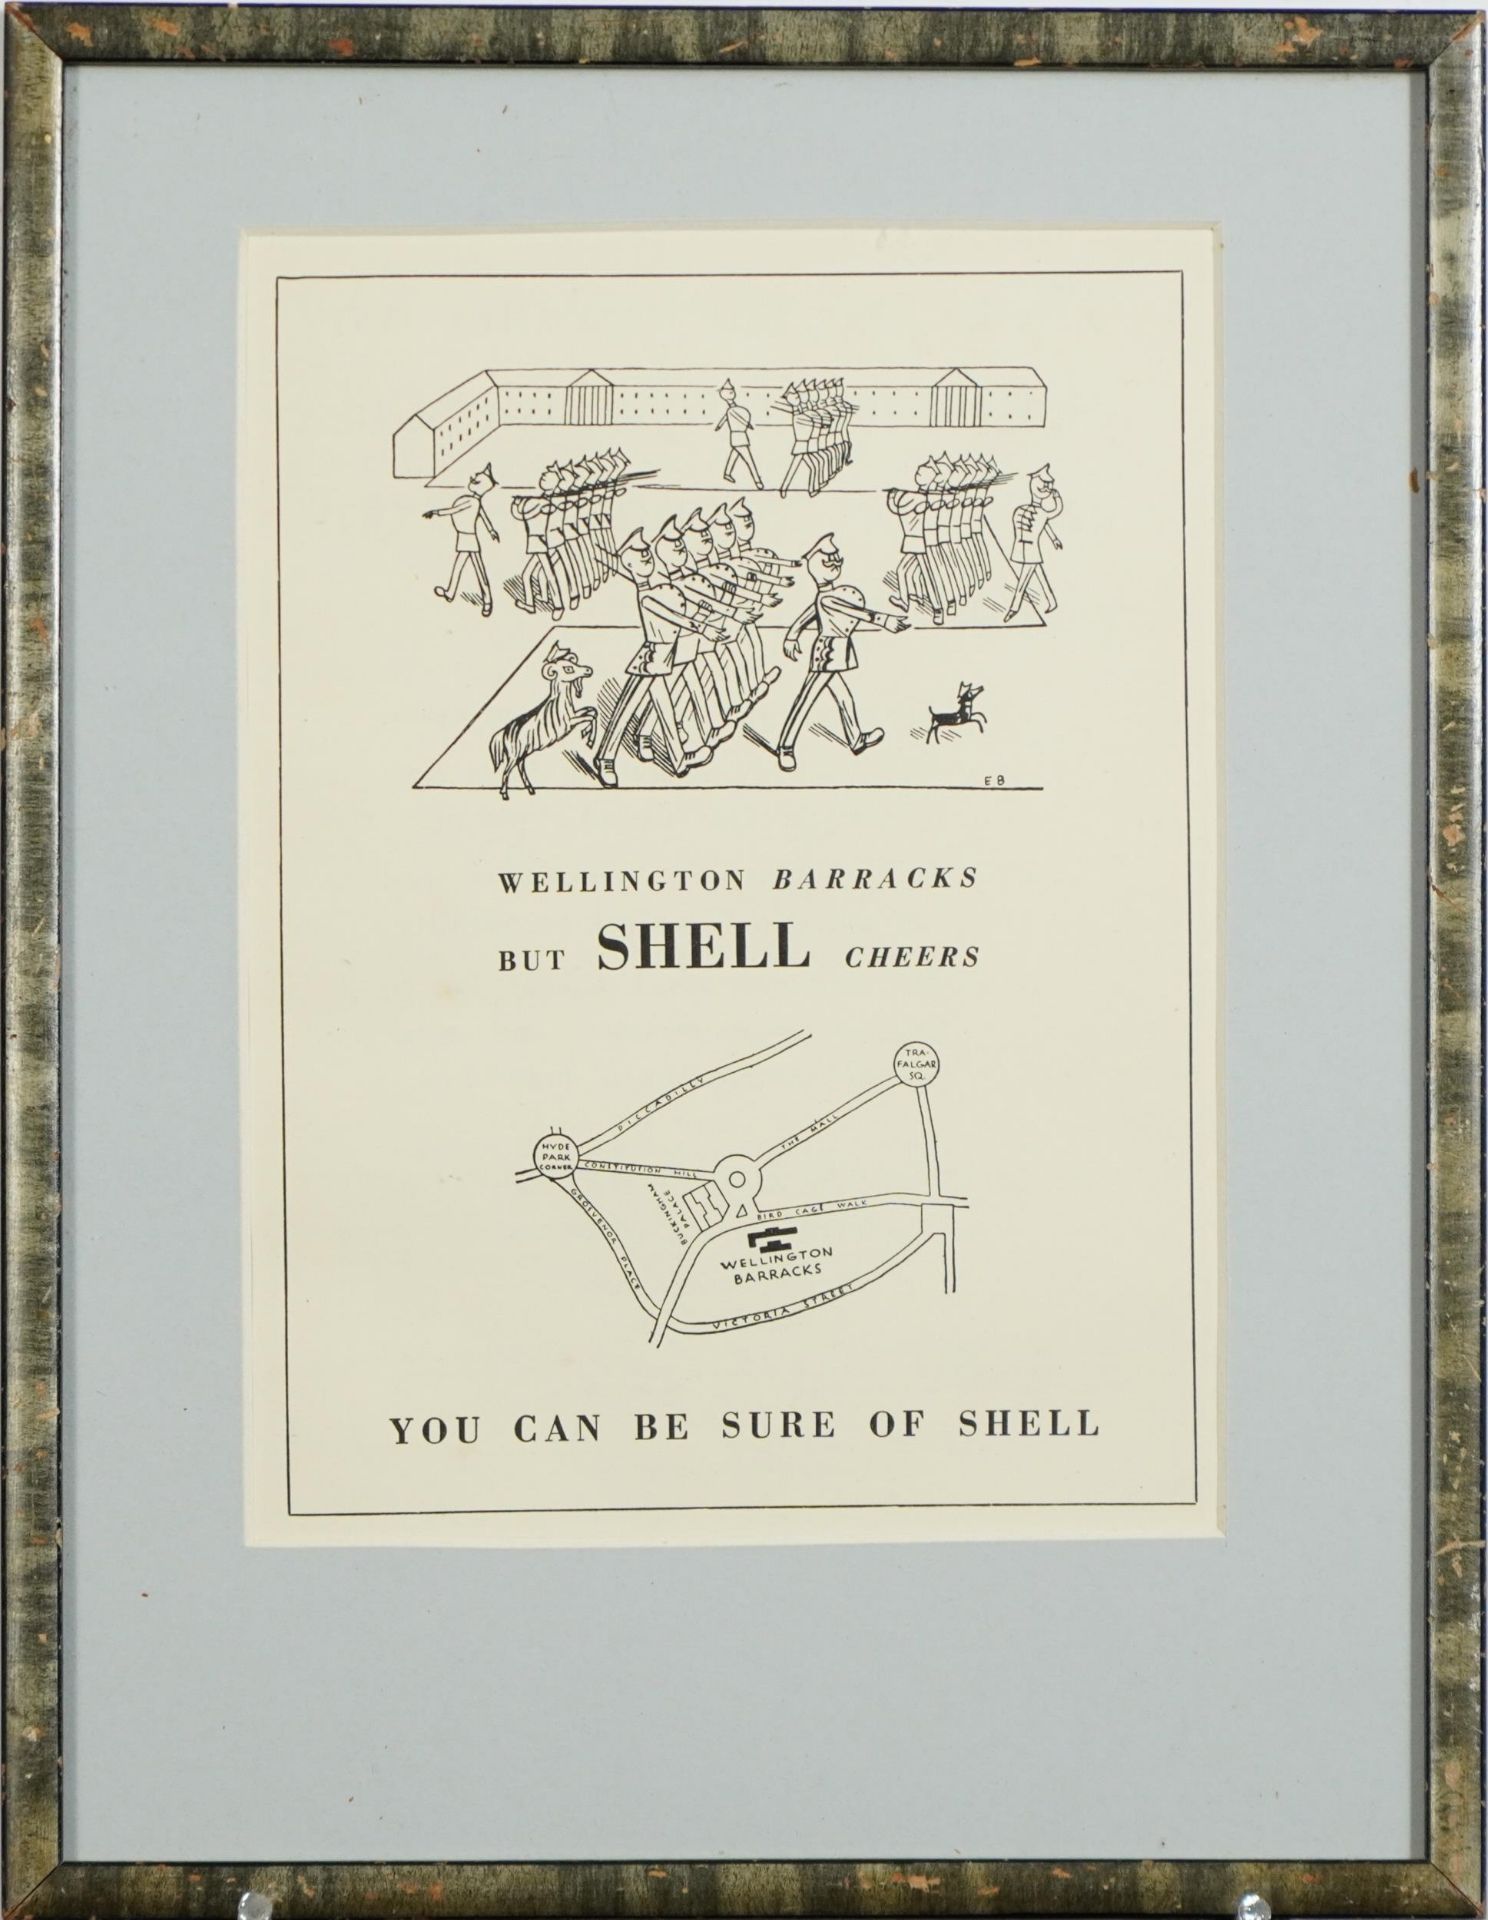 Edward Bawden - Wellington Barracks, You Can Be Sure of Shell lithograph, inscribed verso Curwen - Image 2 of 4